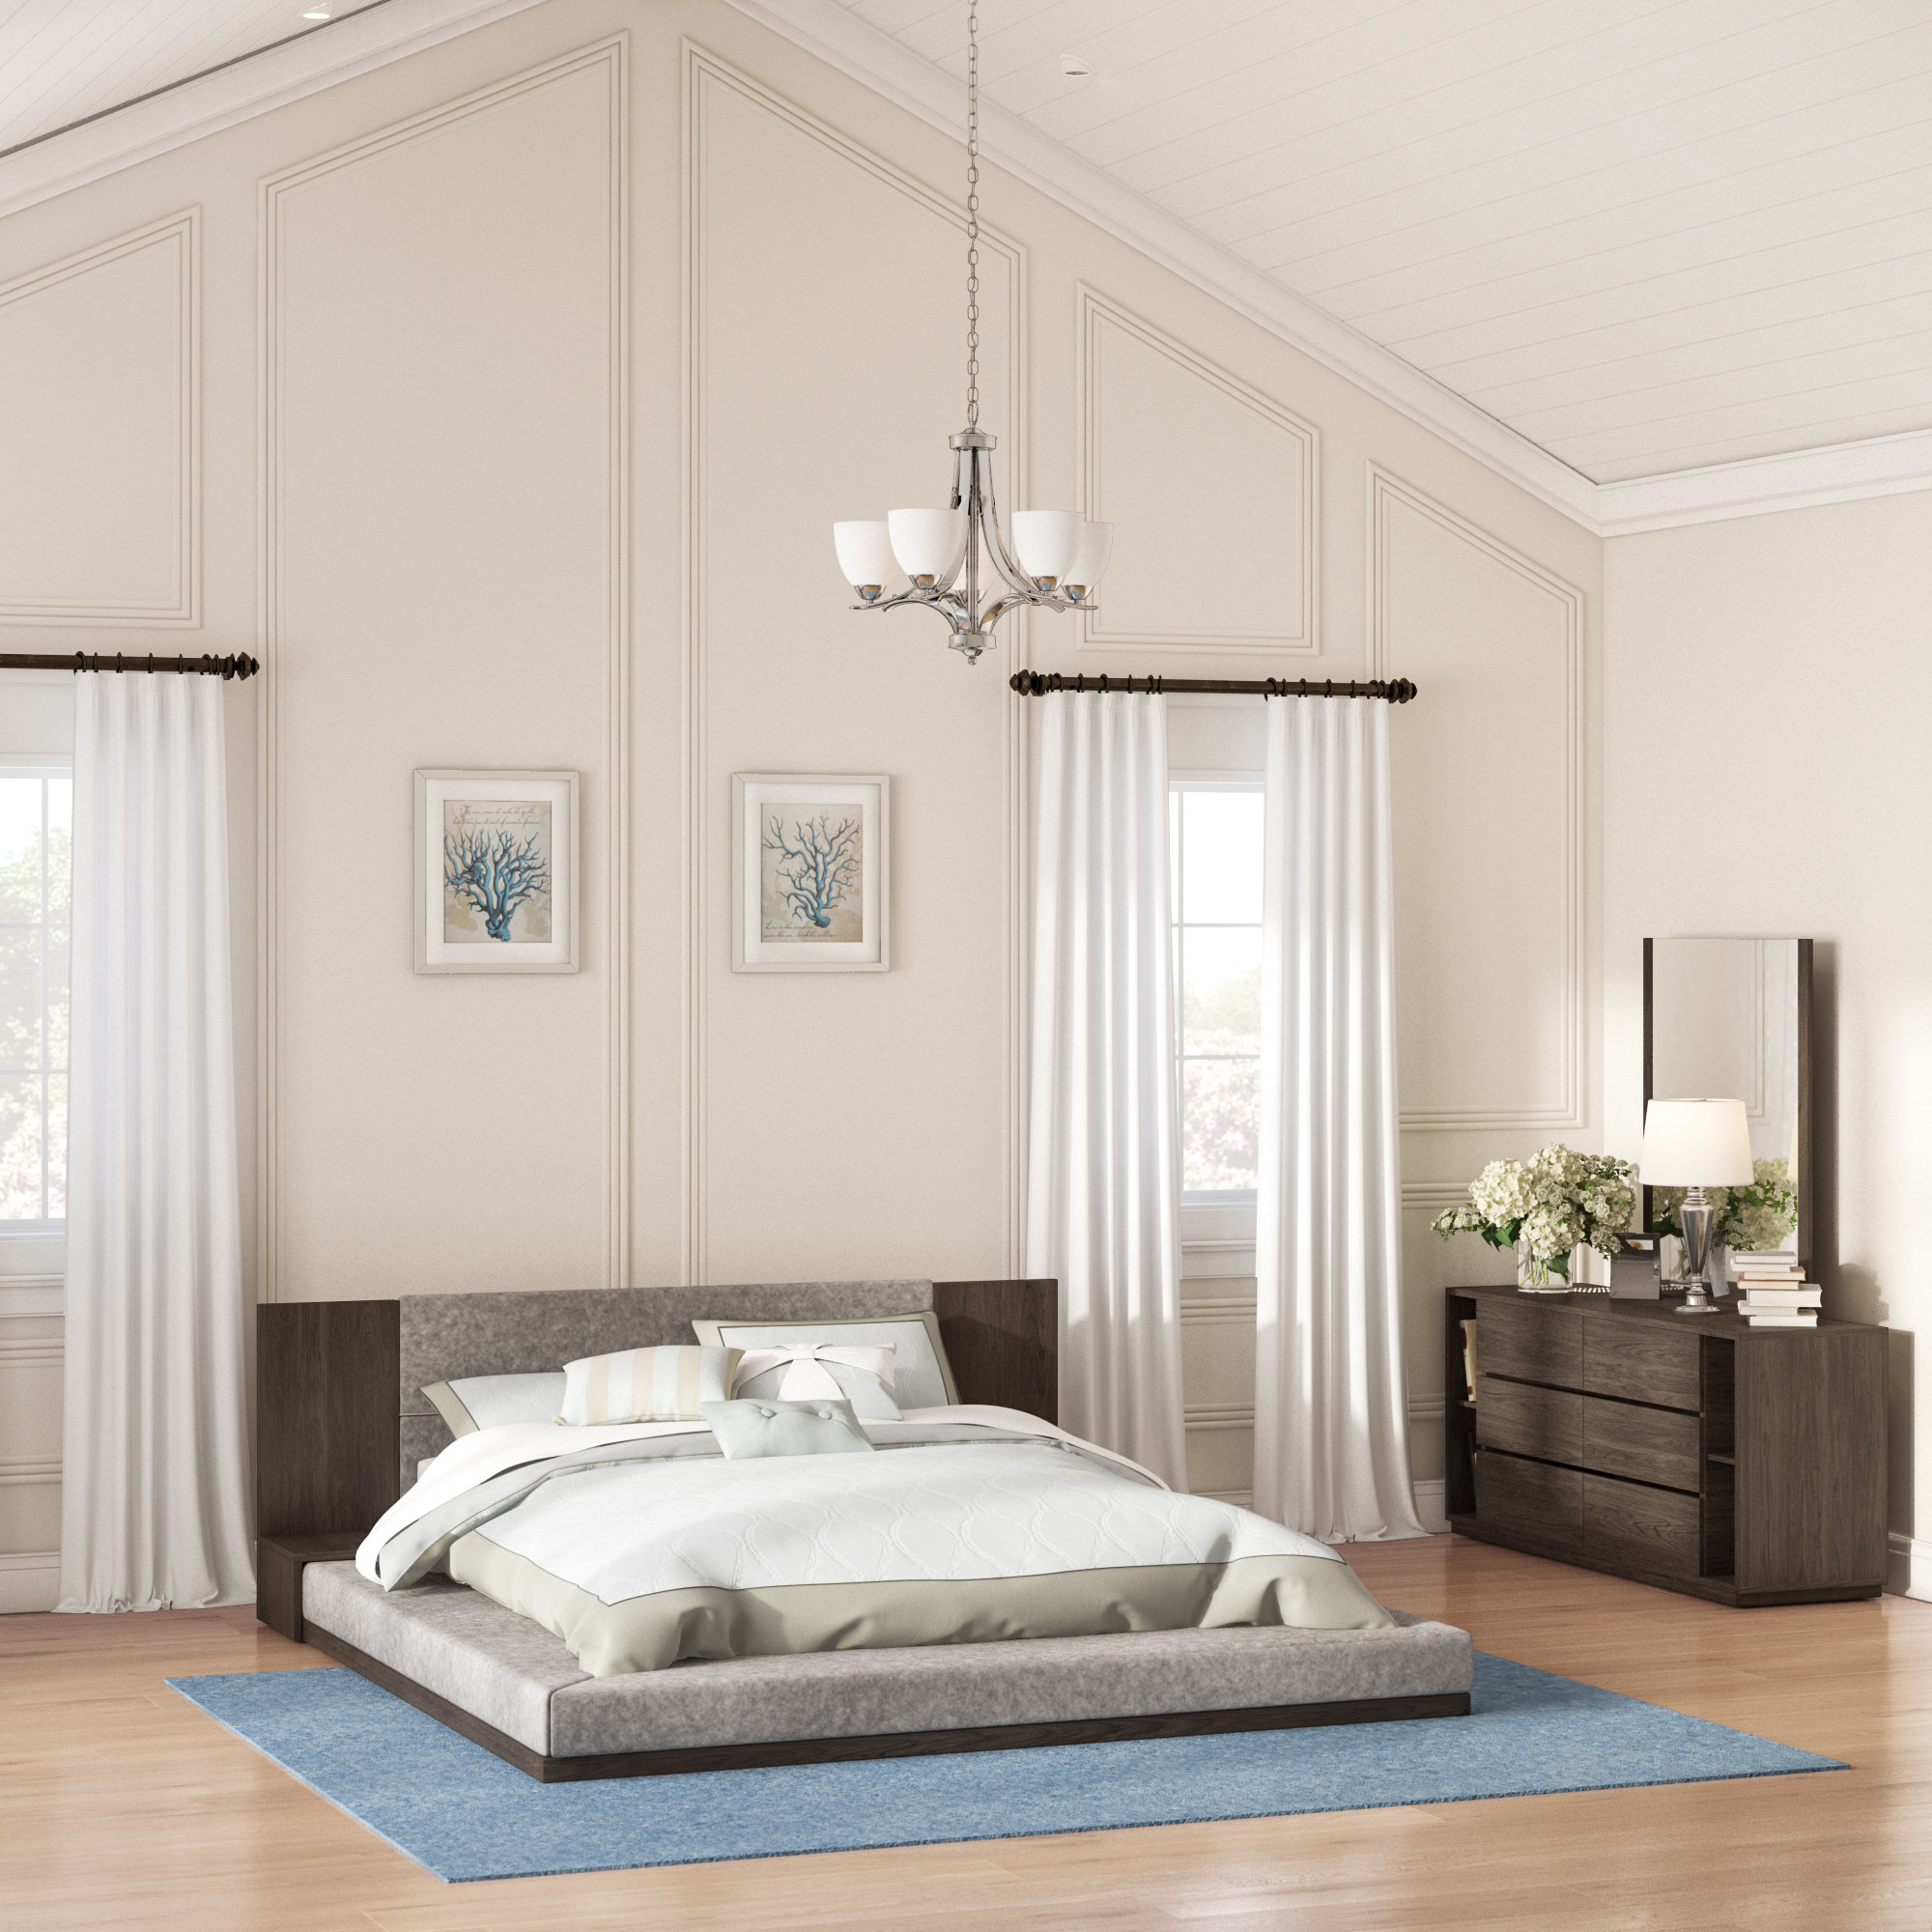 American Furniture Classics Six Piece Bedroom Set Grey,What Does 400 Sq Ft Look Like